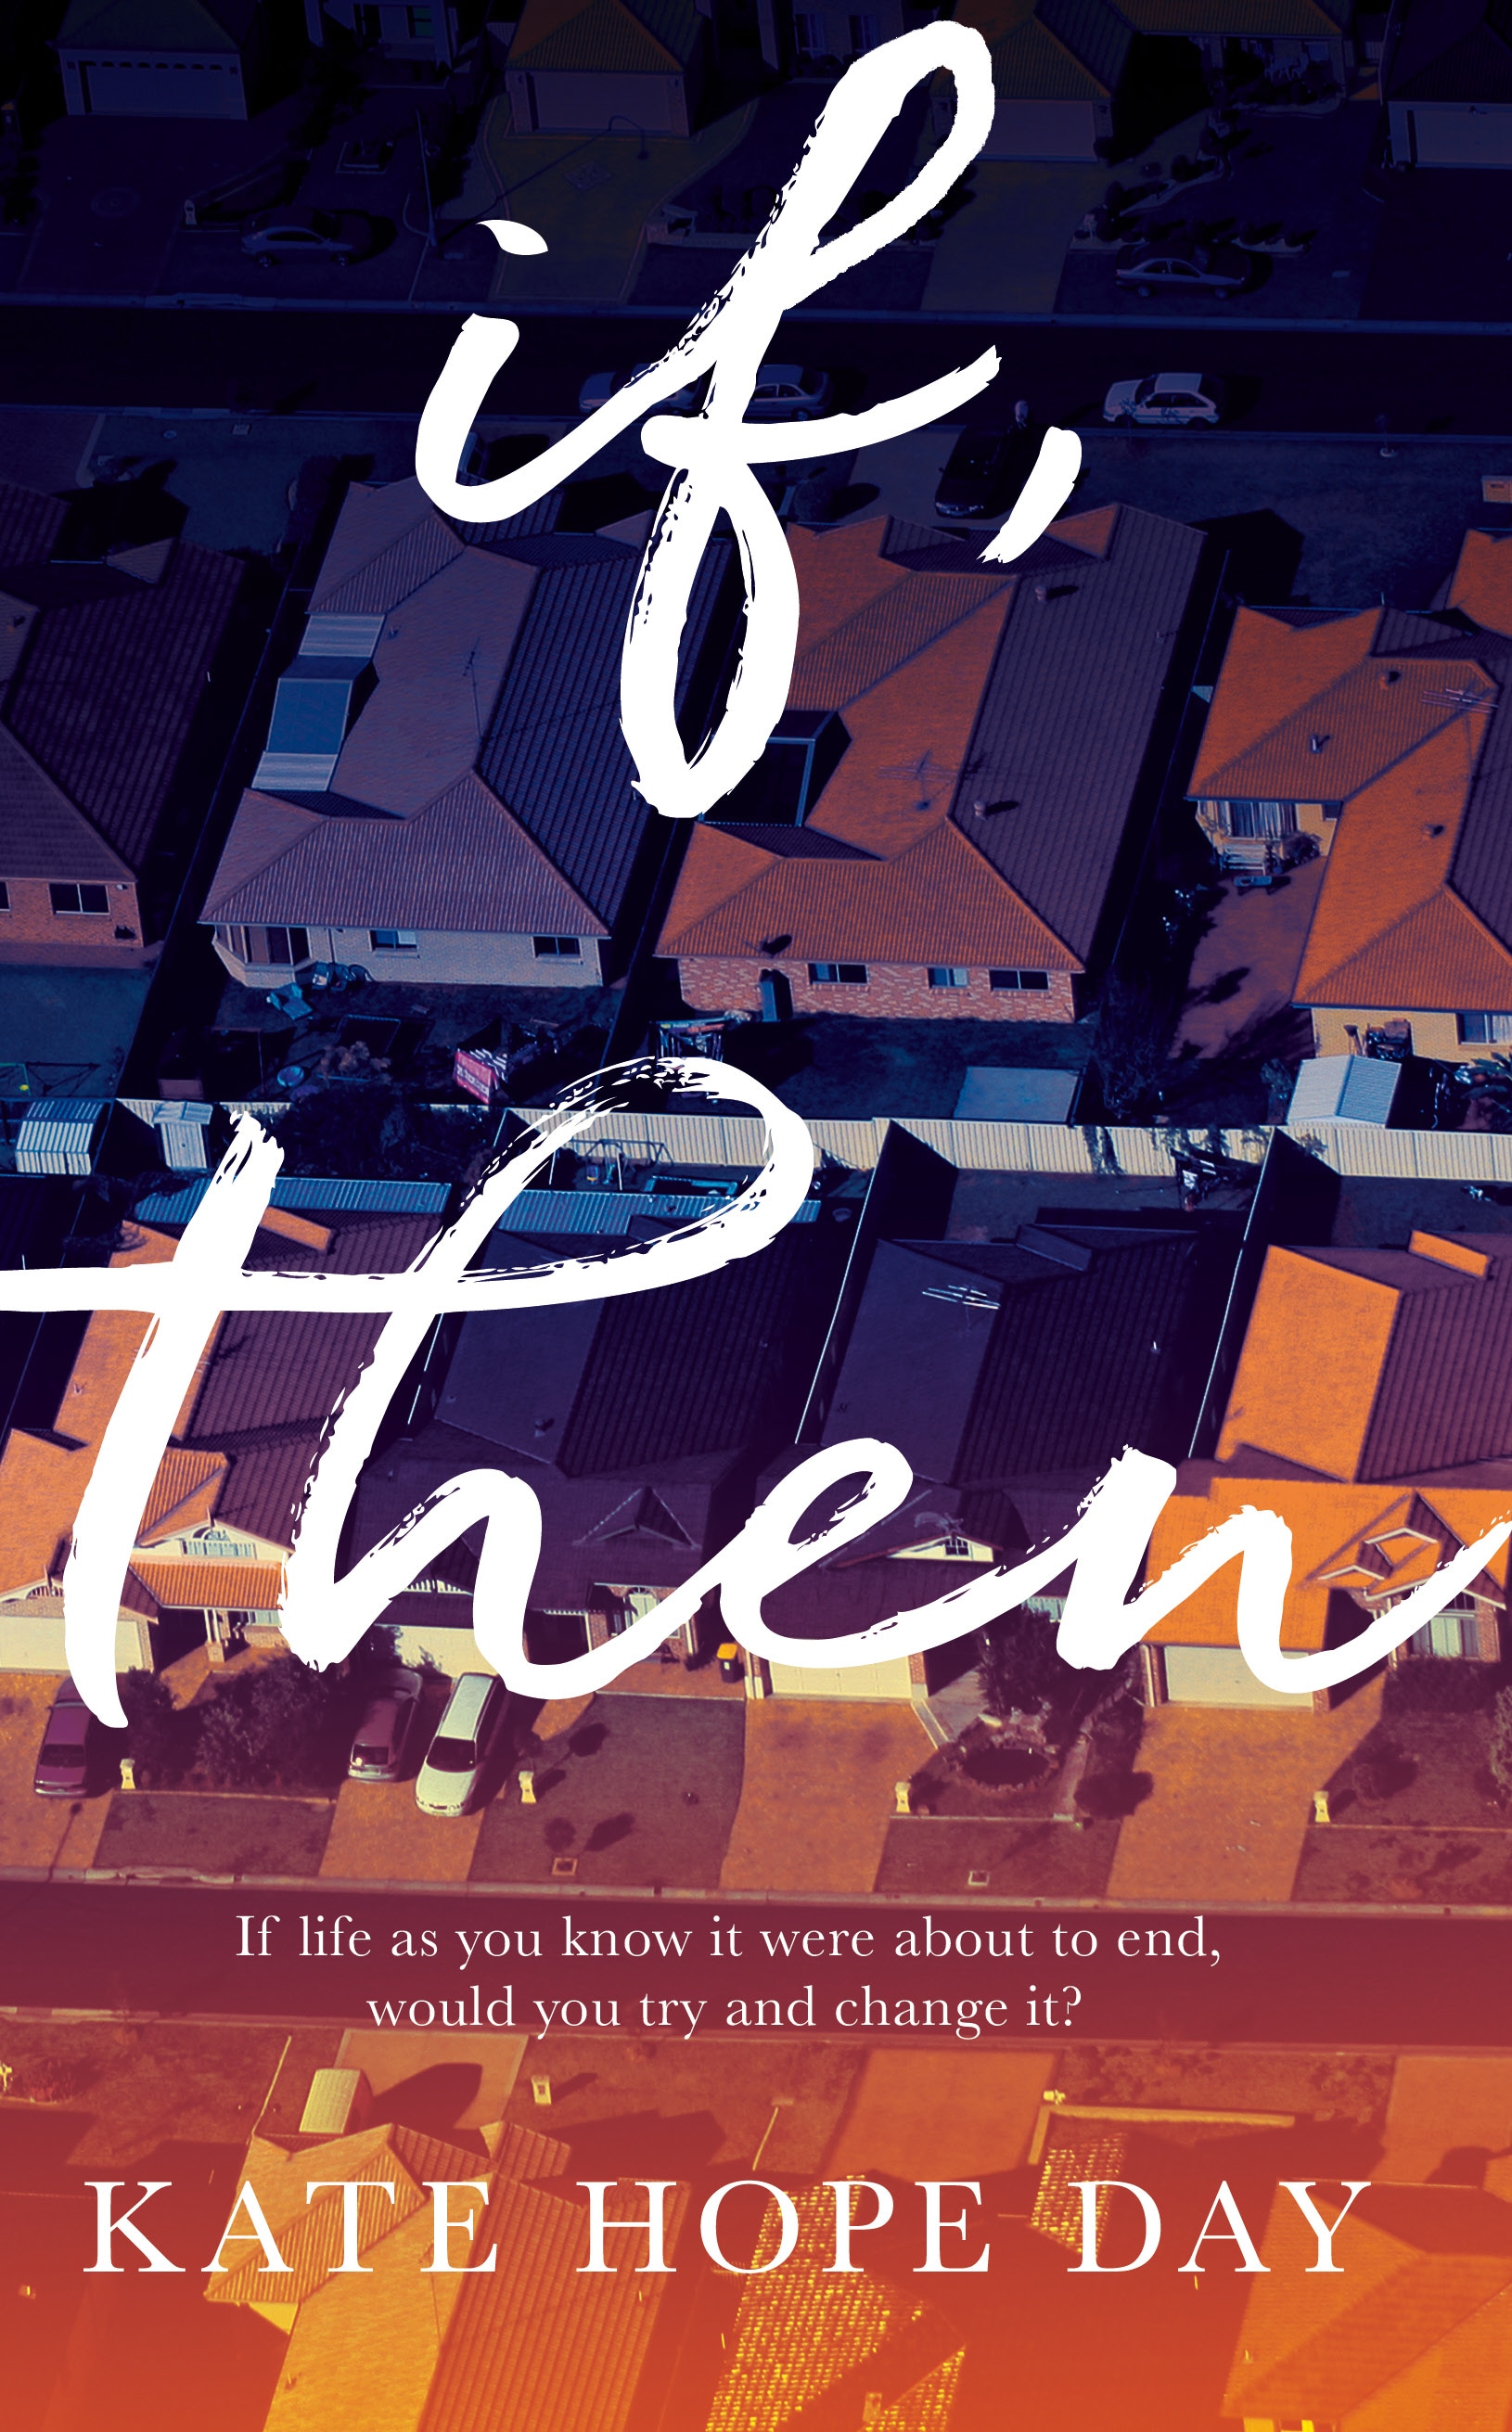 Book “If, Then” by Kate Hope Day — April 18, 2019